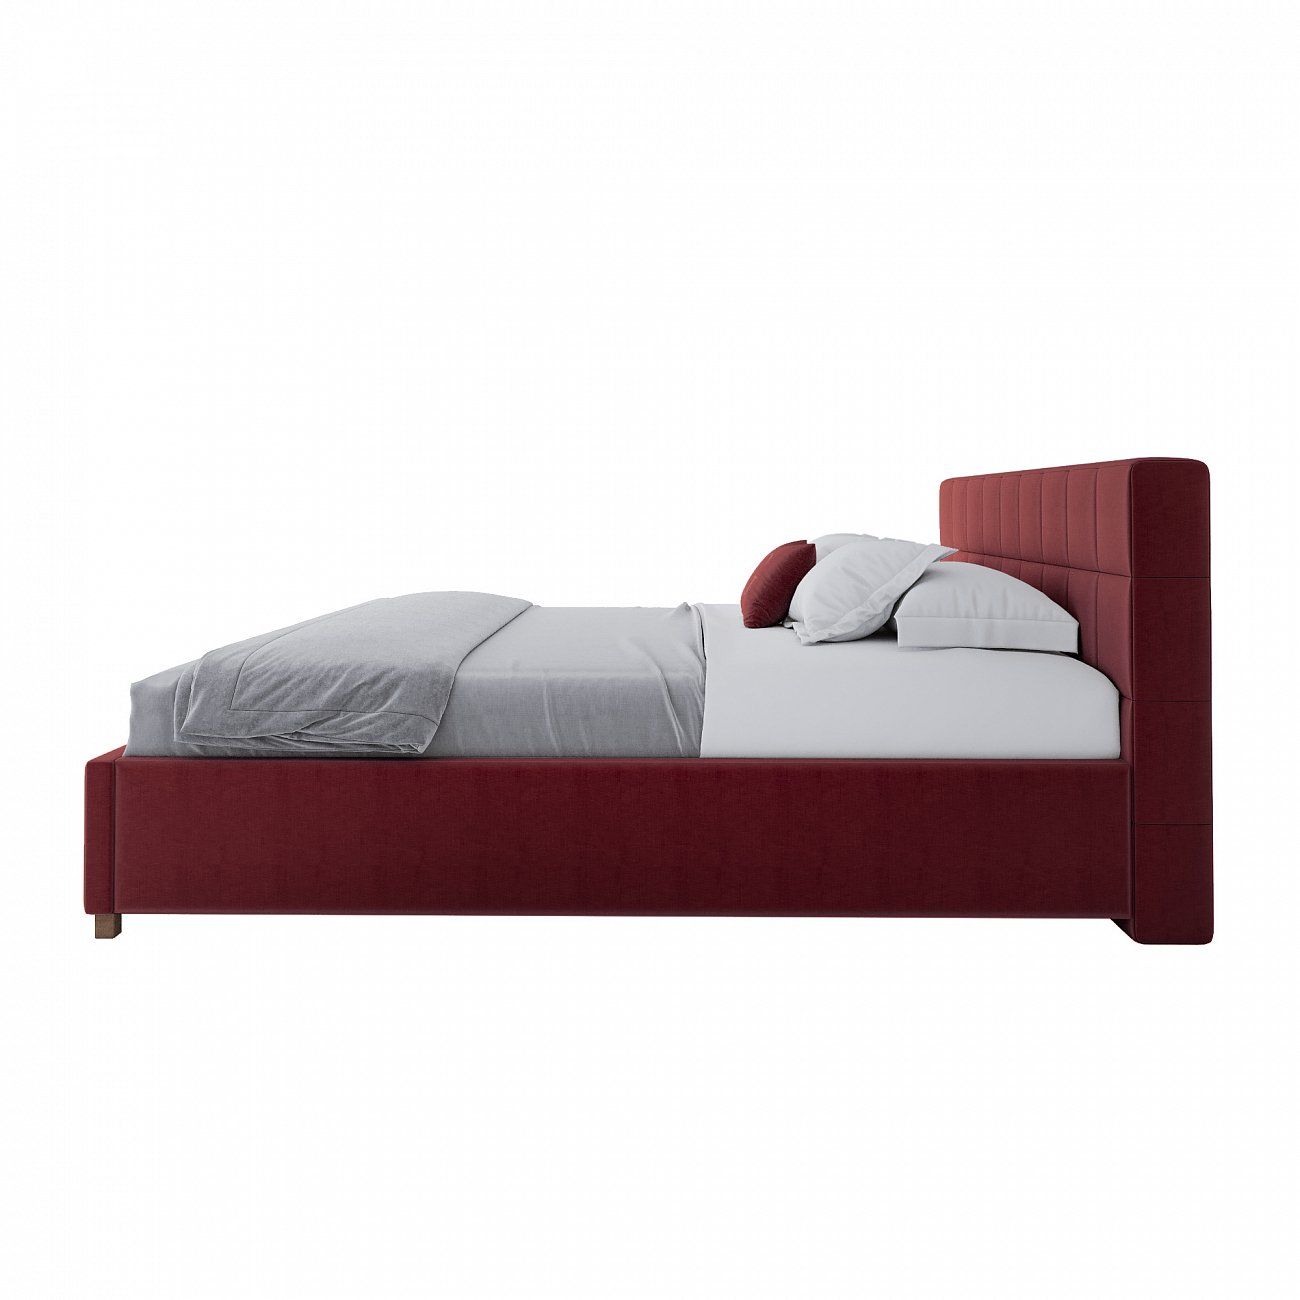 Large bed 200x200 Wales red